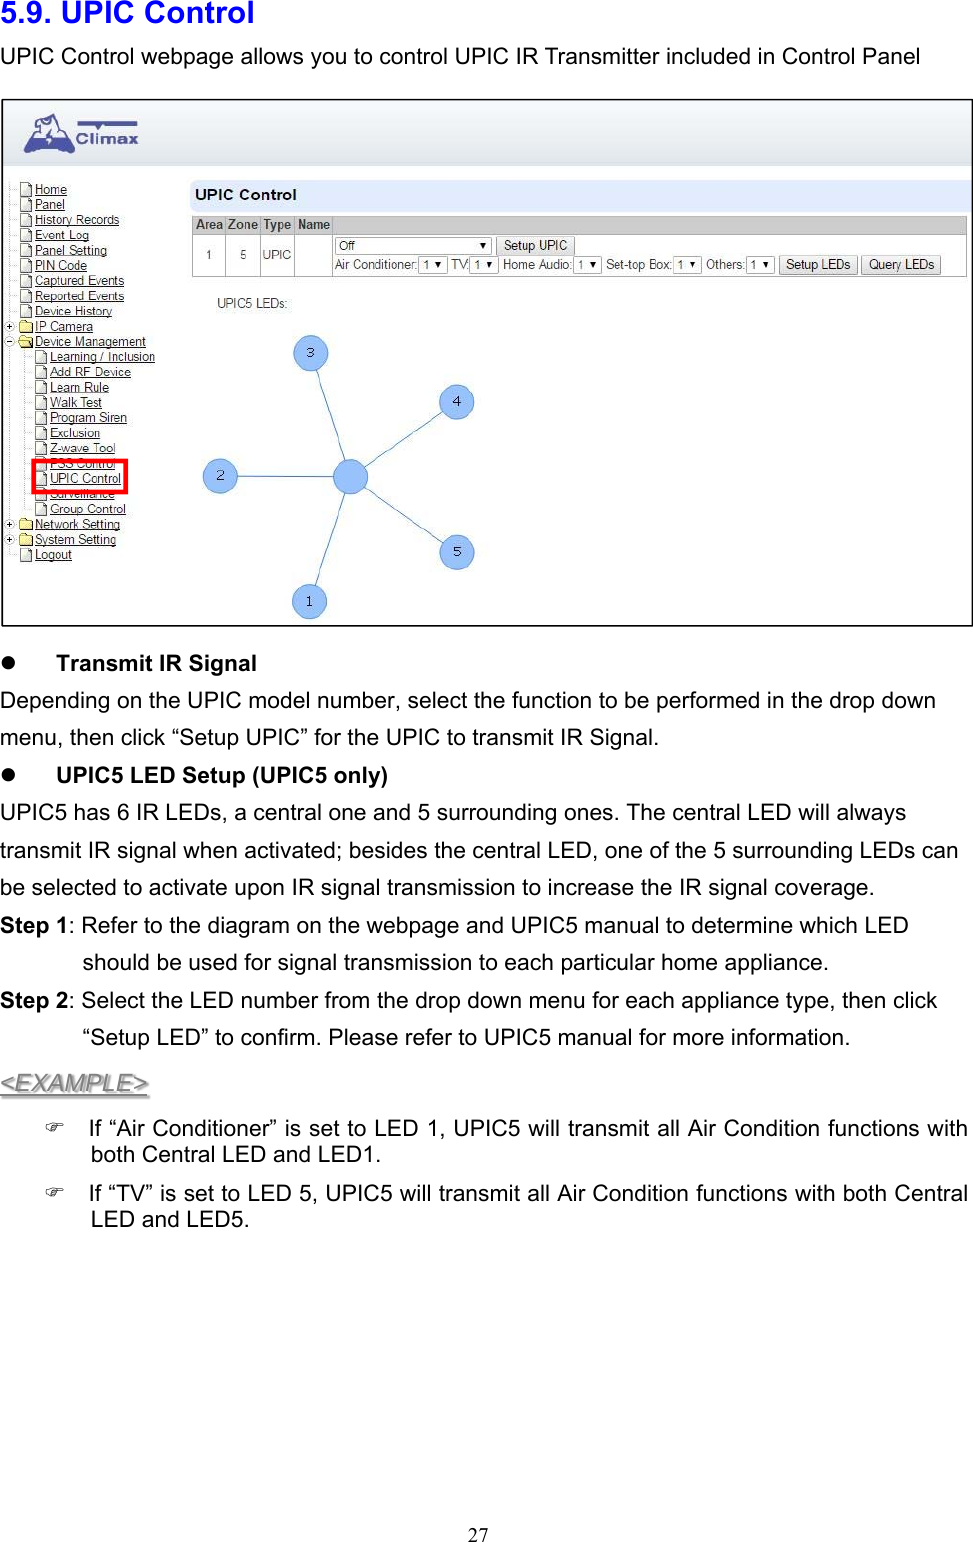  275.9. UPIC Control UPIC Control webpage allows you to control UPIC IR Transmitter included in Control Panel   Transmit IR Signal Depending on the UPIC model number, select the function to be performed in the drop down menu, then click “Setup UPIC” for the UPIC to transmit IR Signal.  UPIC5 LED Setup (UPIC5 only) UPIC5 has 6 IR LEDs, a central one and 5 surrounding ones. The central LED will always transmit IR signal when activated; besides the central LED, one of the 5 surrounding LEDs can be selected to activate upon IR signal transmission to increase the IR signal coverage. Step 1: Refer to the diagram on the webpage and UPIC5 manual to determine which LED should be used for signal transmission to each particular home appliance. Step 2: Select the LED number from the drop down menu for each appliance type, then click “Setup LED” to confirm. Please refer to UPIC5 manual for more information. &lt;EXAMPLE&gt;   If “Air Conditioner” is set to LED 1, UPIC5 will transmit all Air Condition functions with both Central LED and LED1.   If “TV” is set to LED 5, UPIC5 will transmit all Air Condition functions with both Central LED and LED5.    